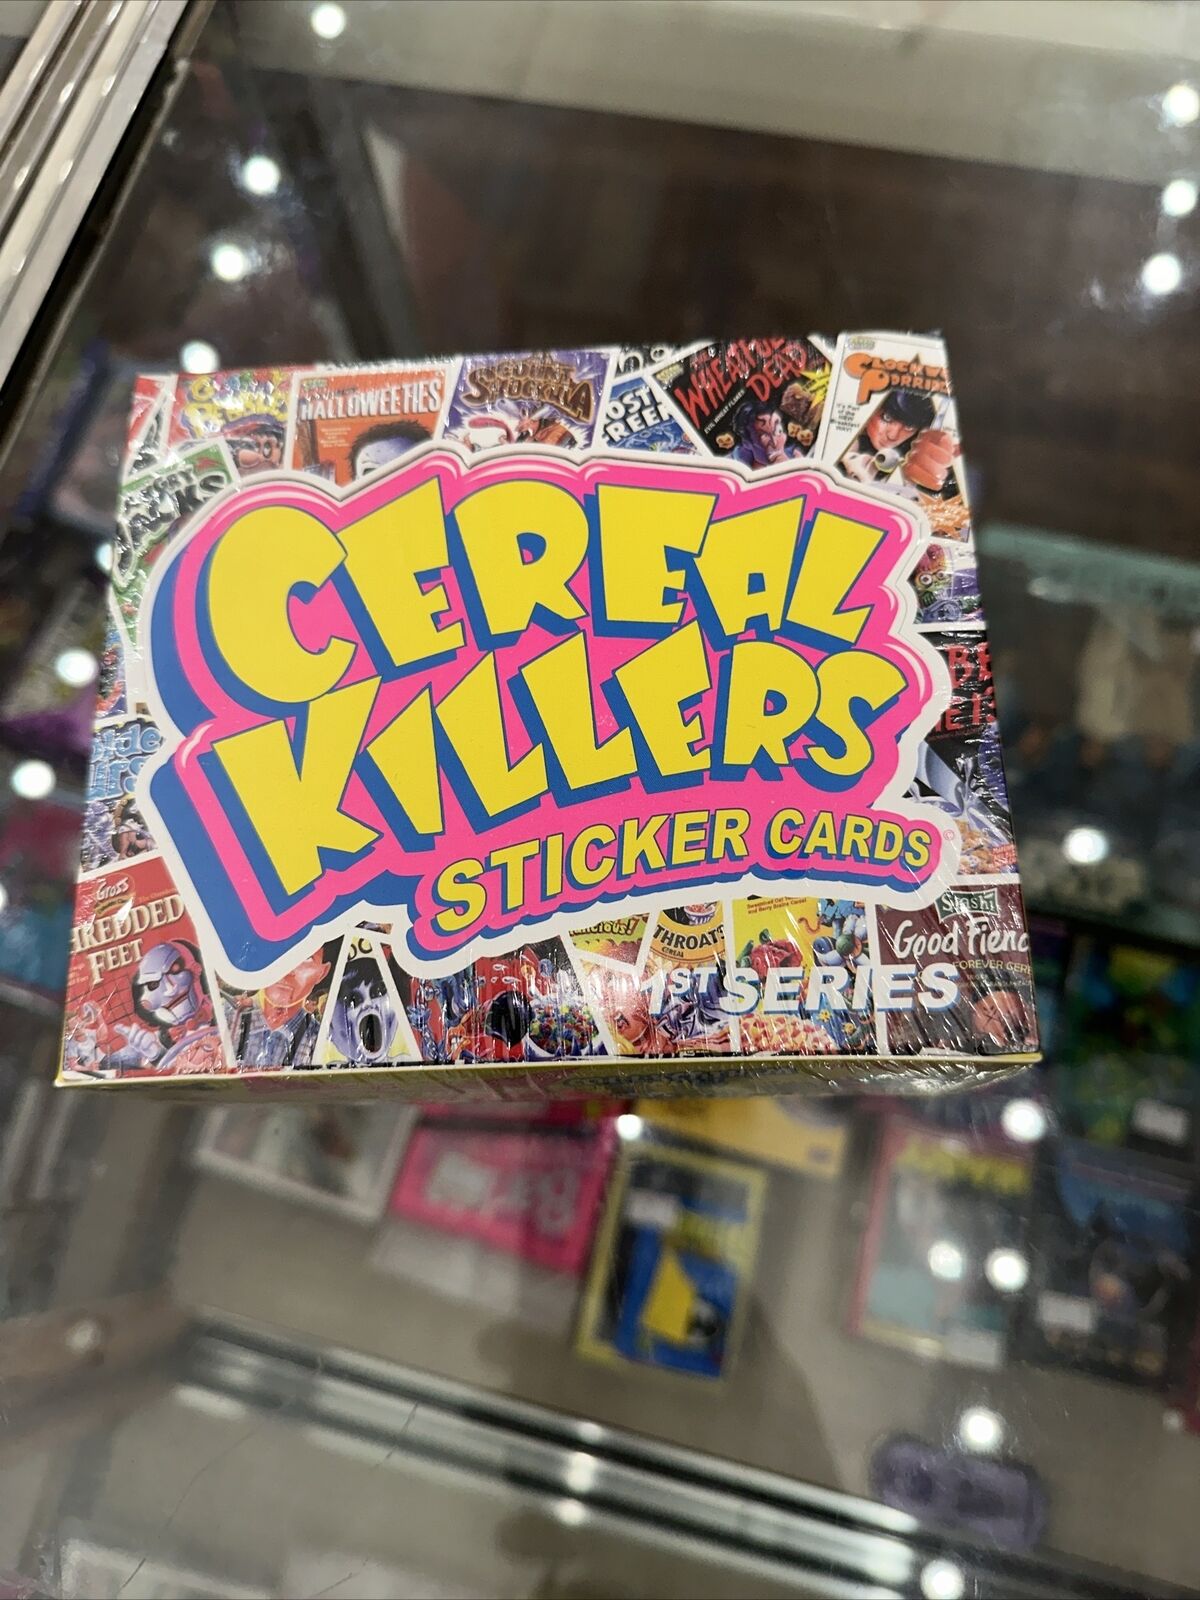 Cereal Killers Sticker Cards 1st Series 24 Pack Hobby Box “ Limited On Ebay”